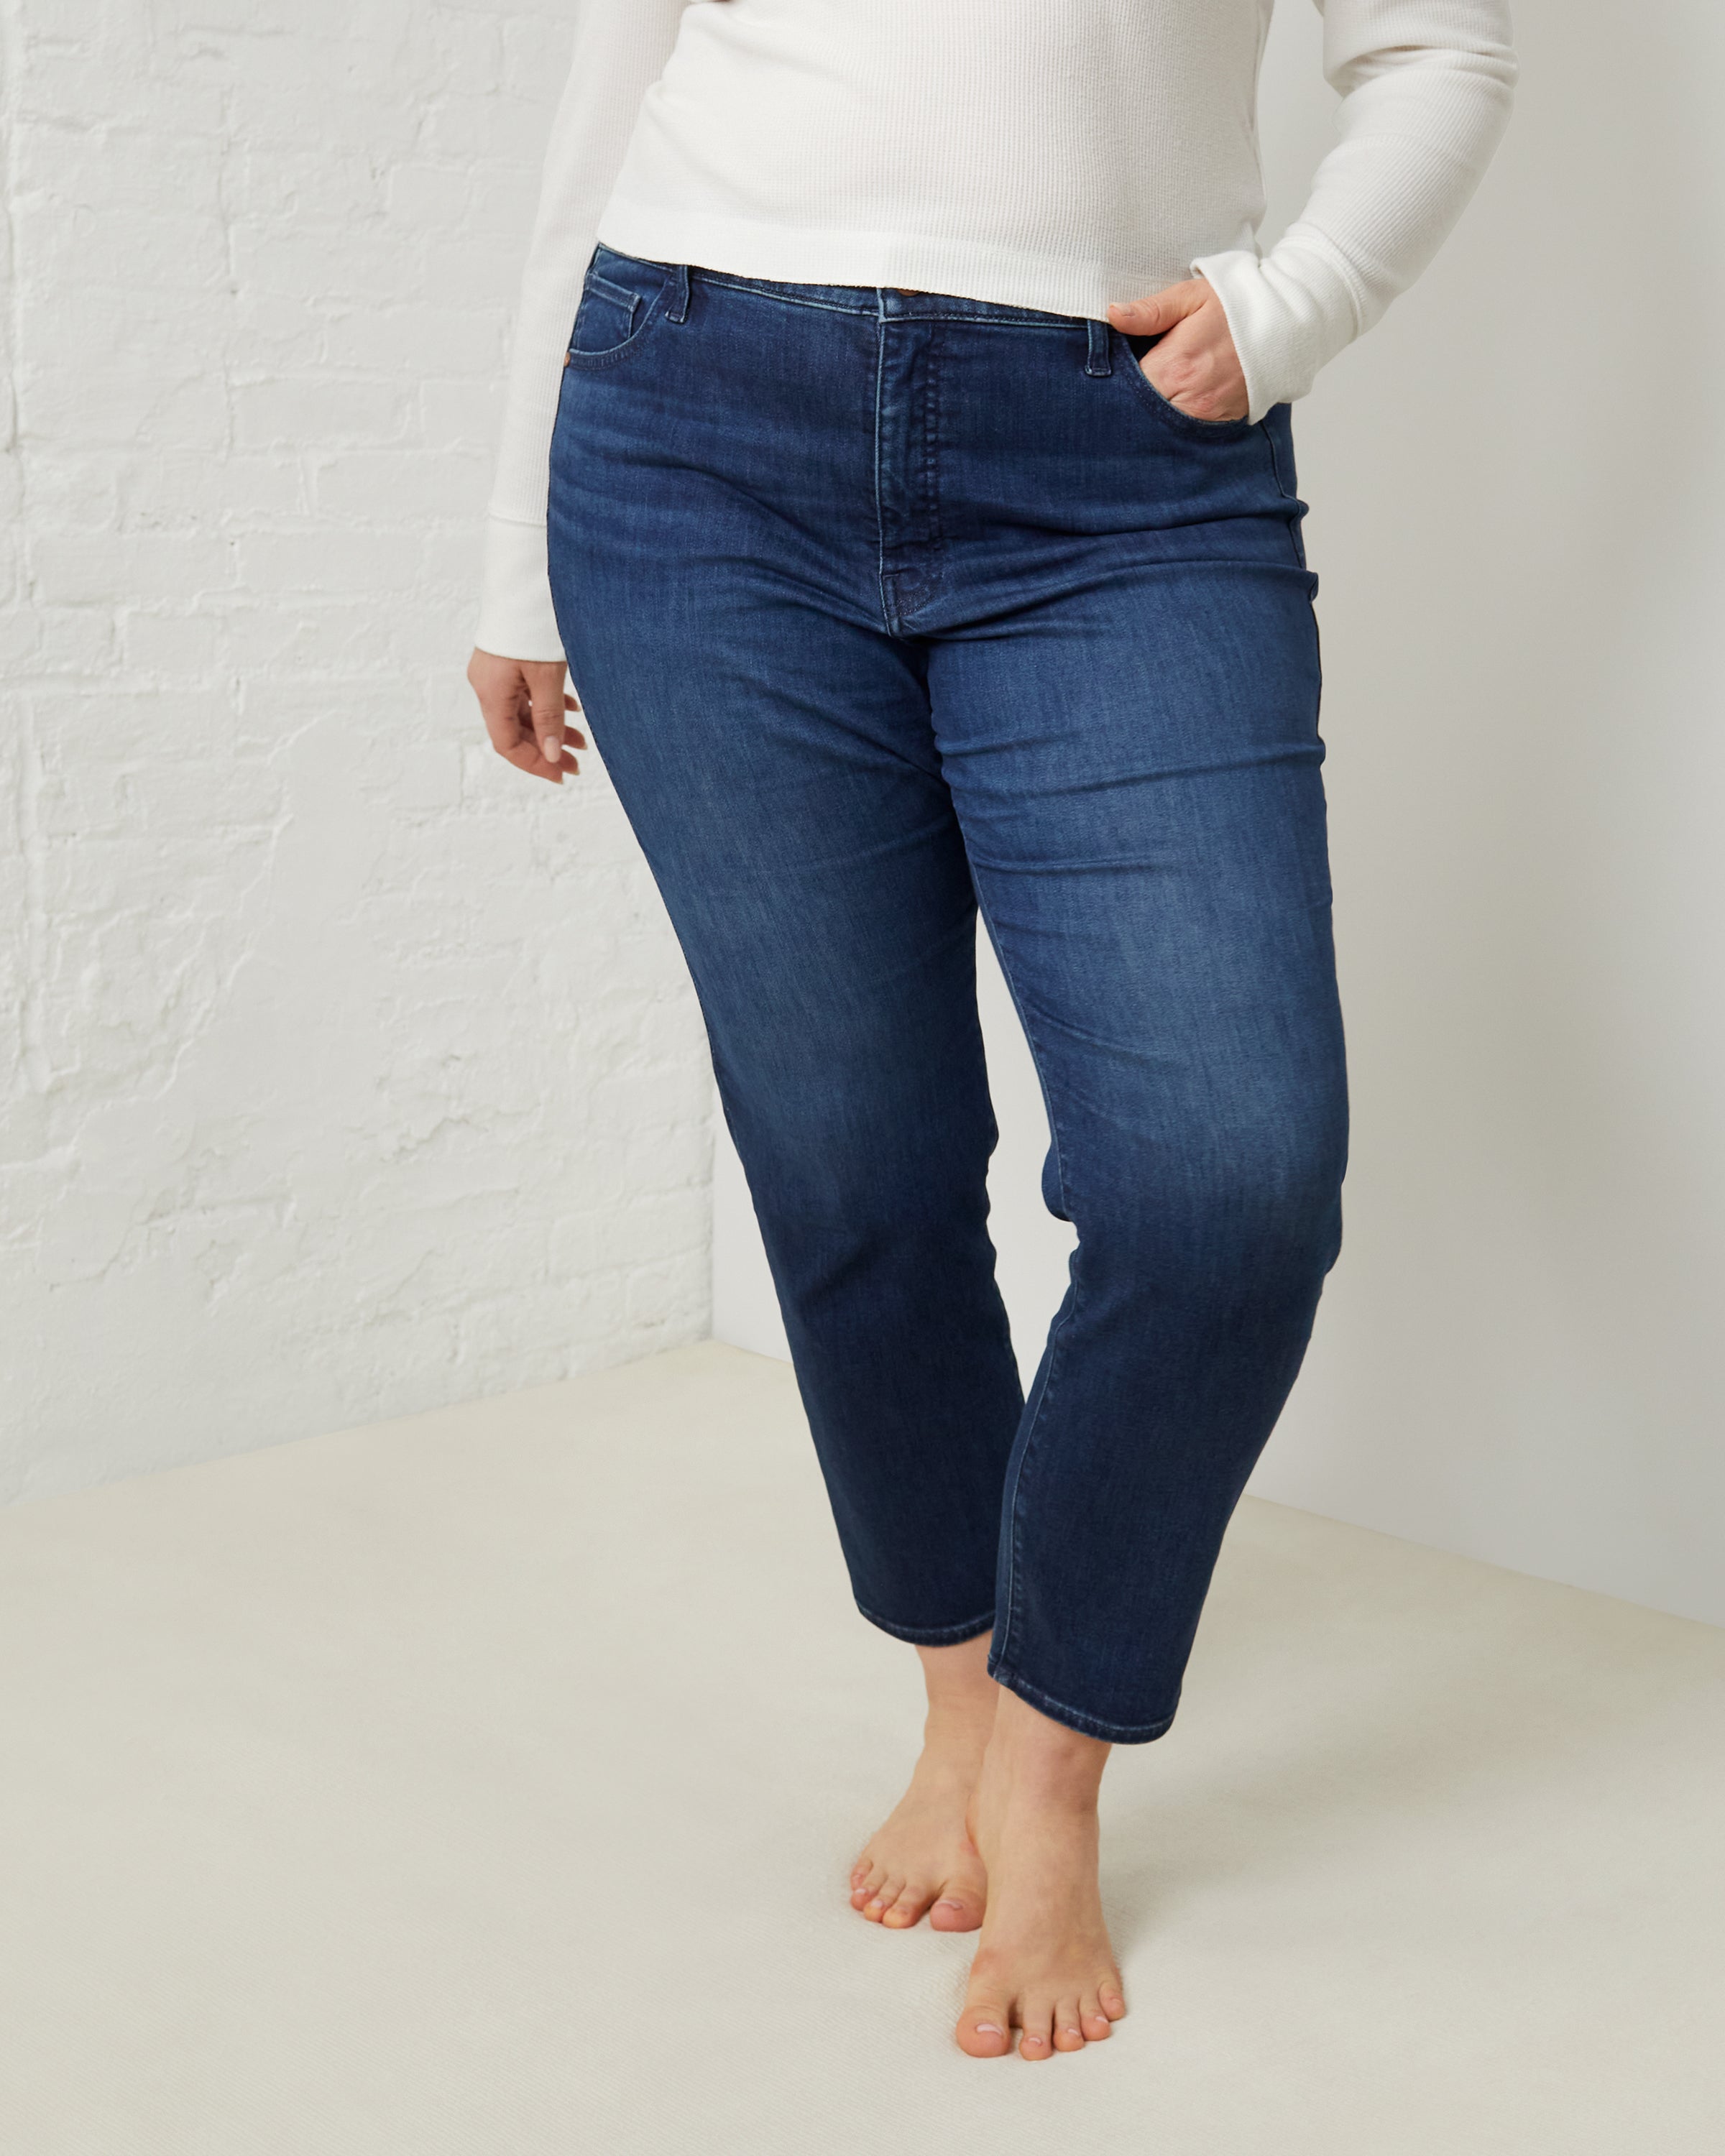 Buy Highly Desirable High Rise Slim Straight Leg Jeans Plus Size for USD  88.00